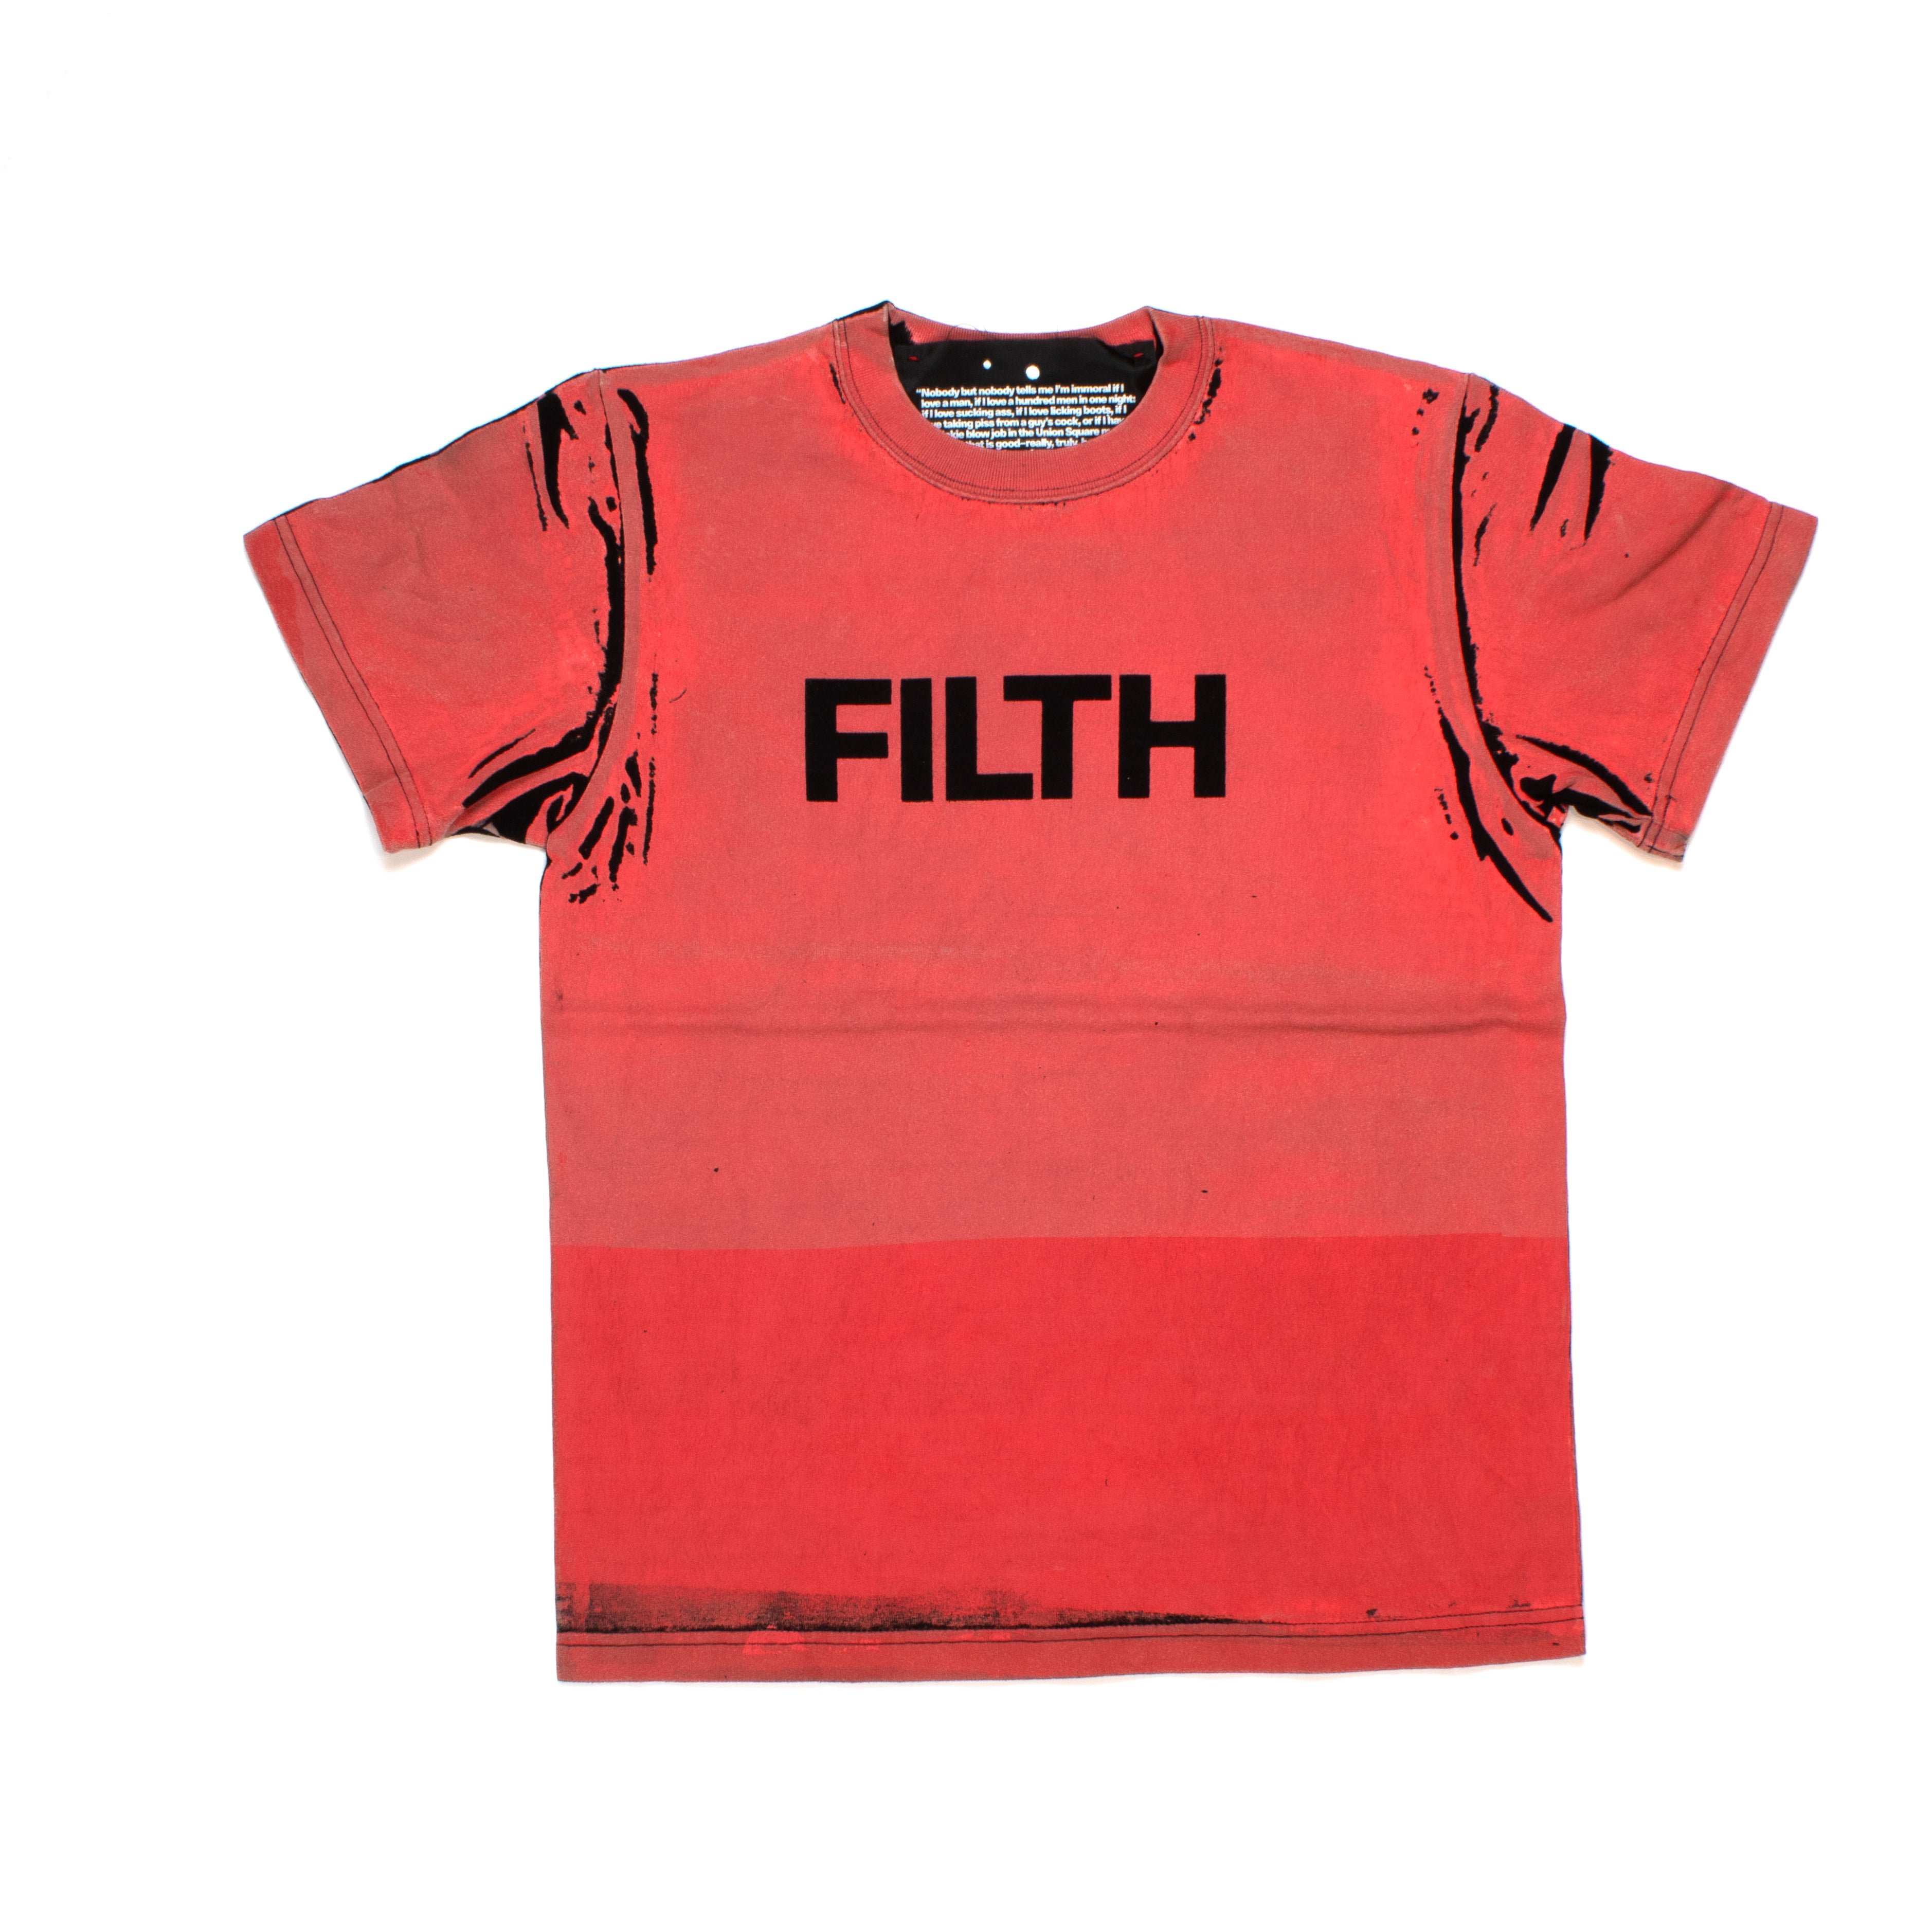 FILTH Red Printed Tee - 2 x 1